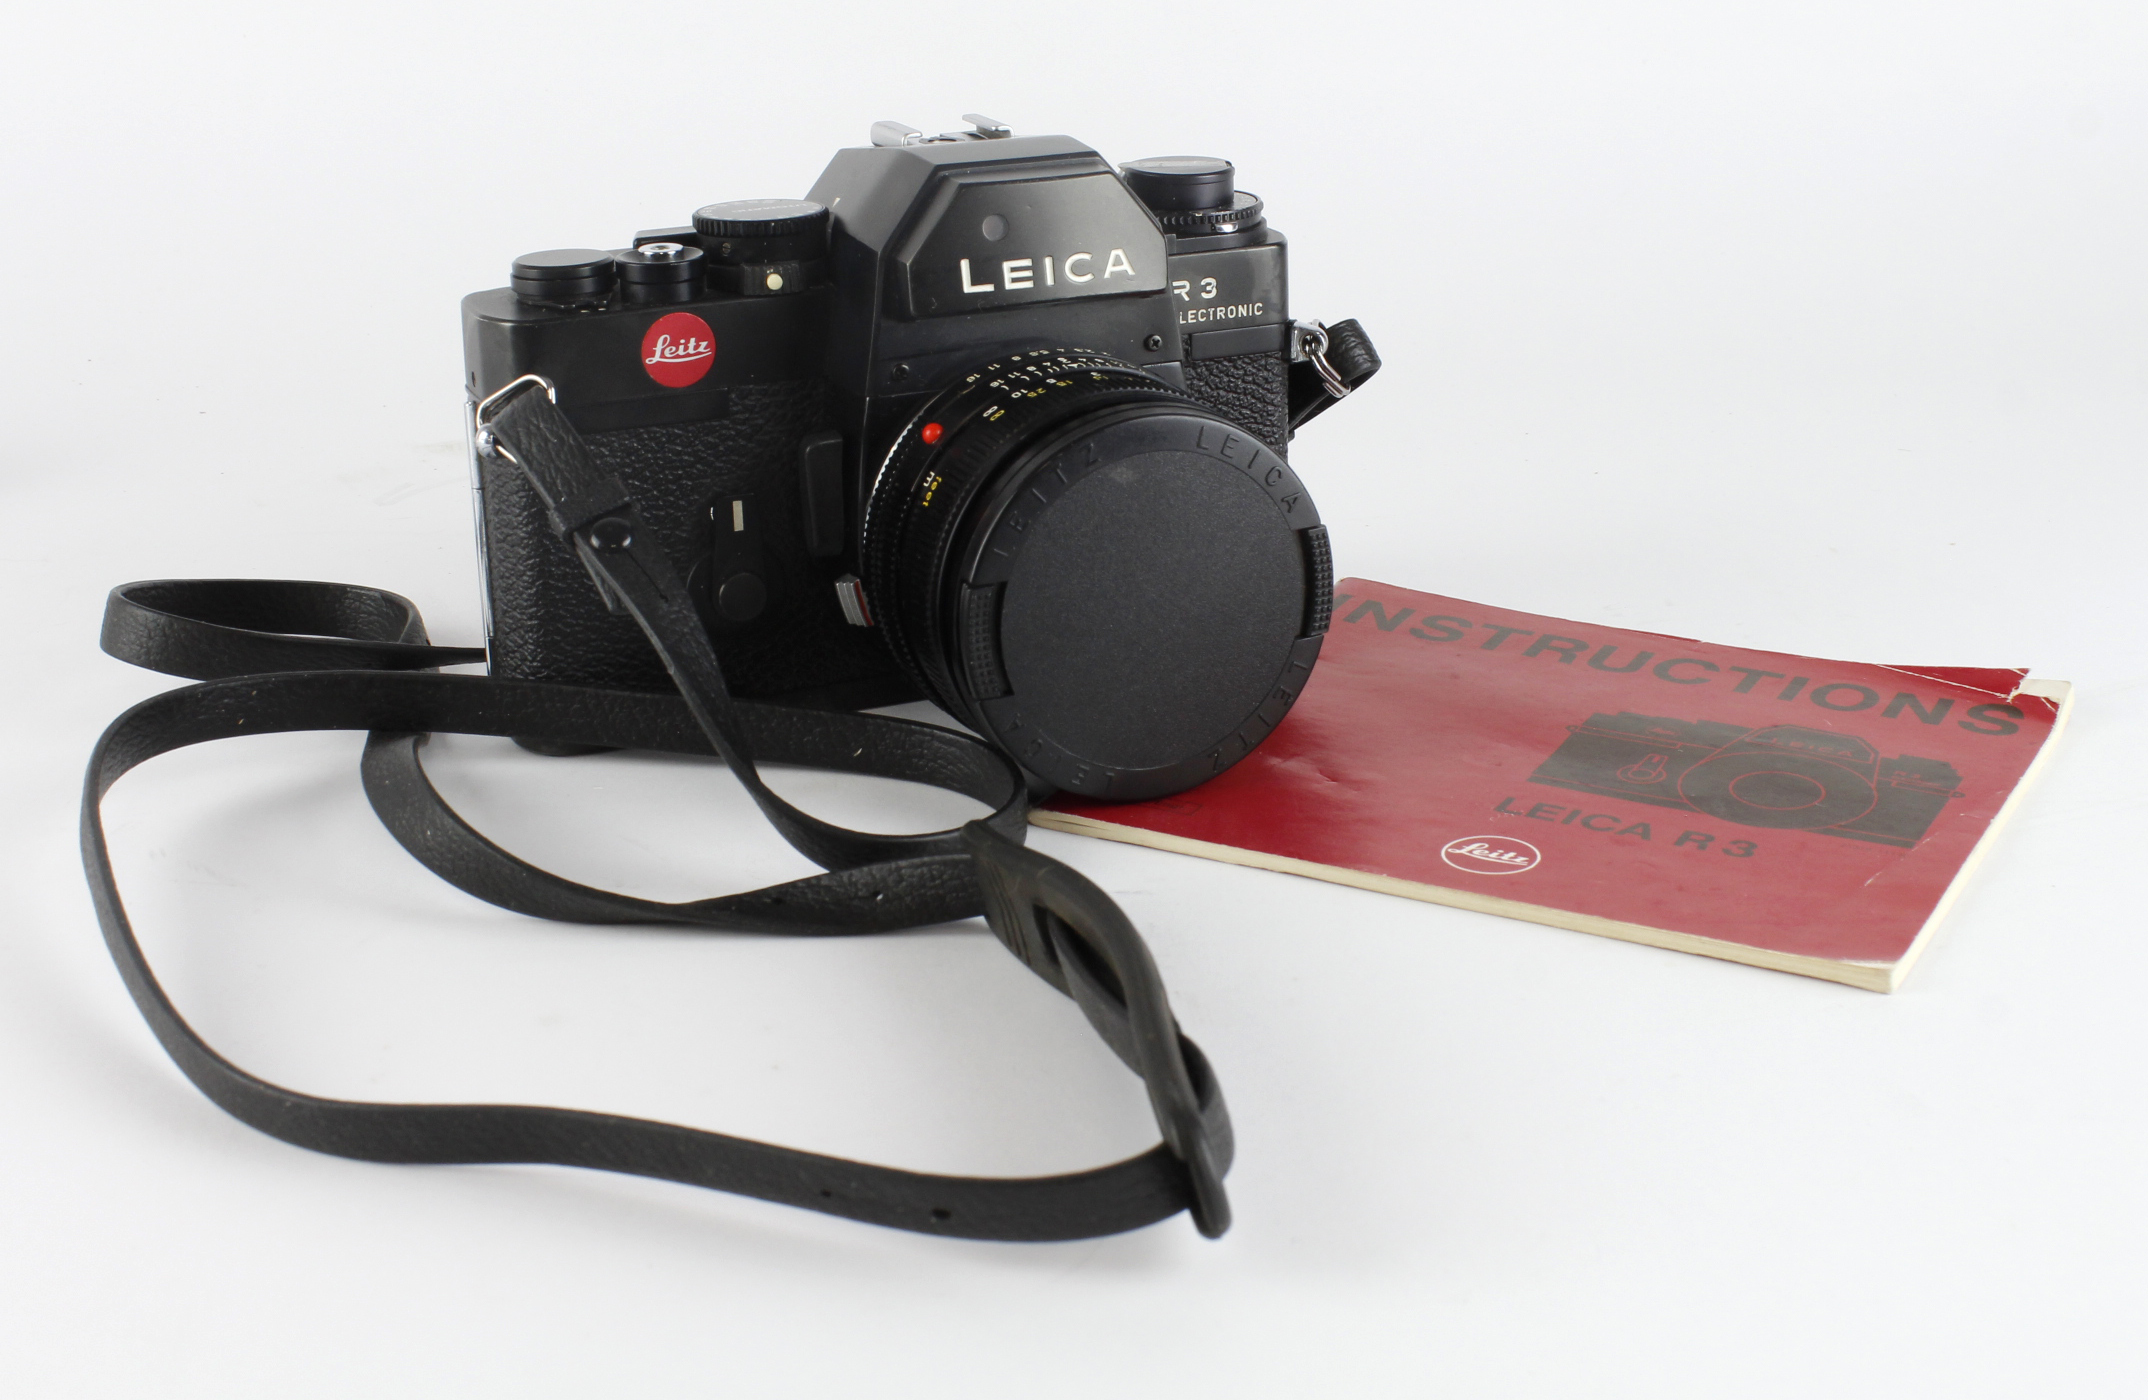 Leica R3 Electronic camera with Leitz Summicron - R 1:2/50 lens (3009800), with instruction booklet